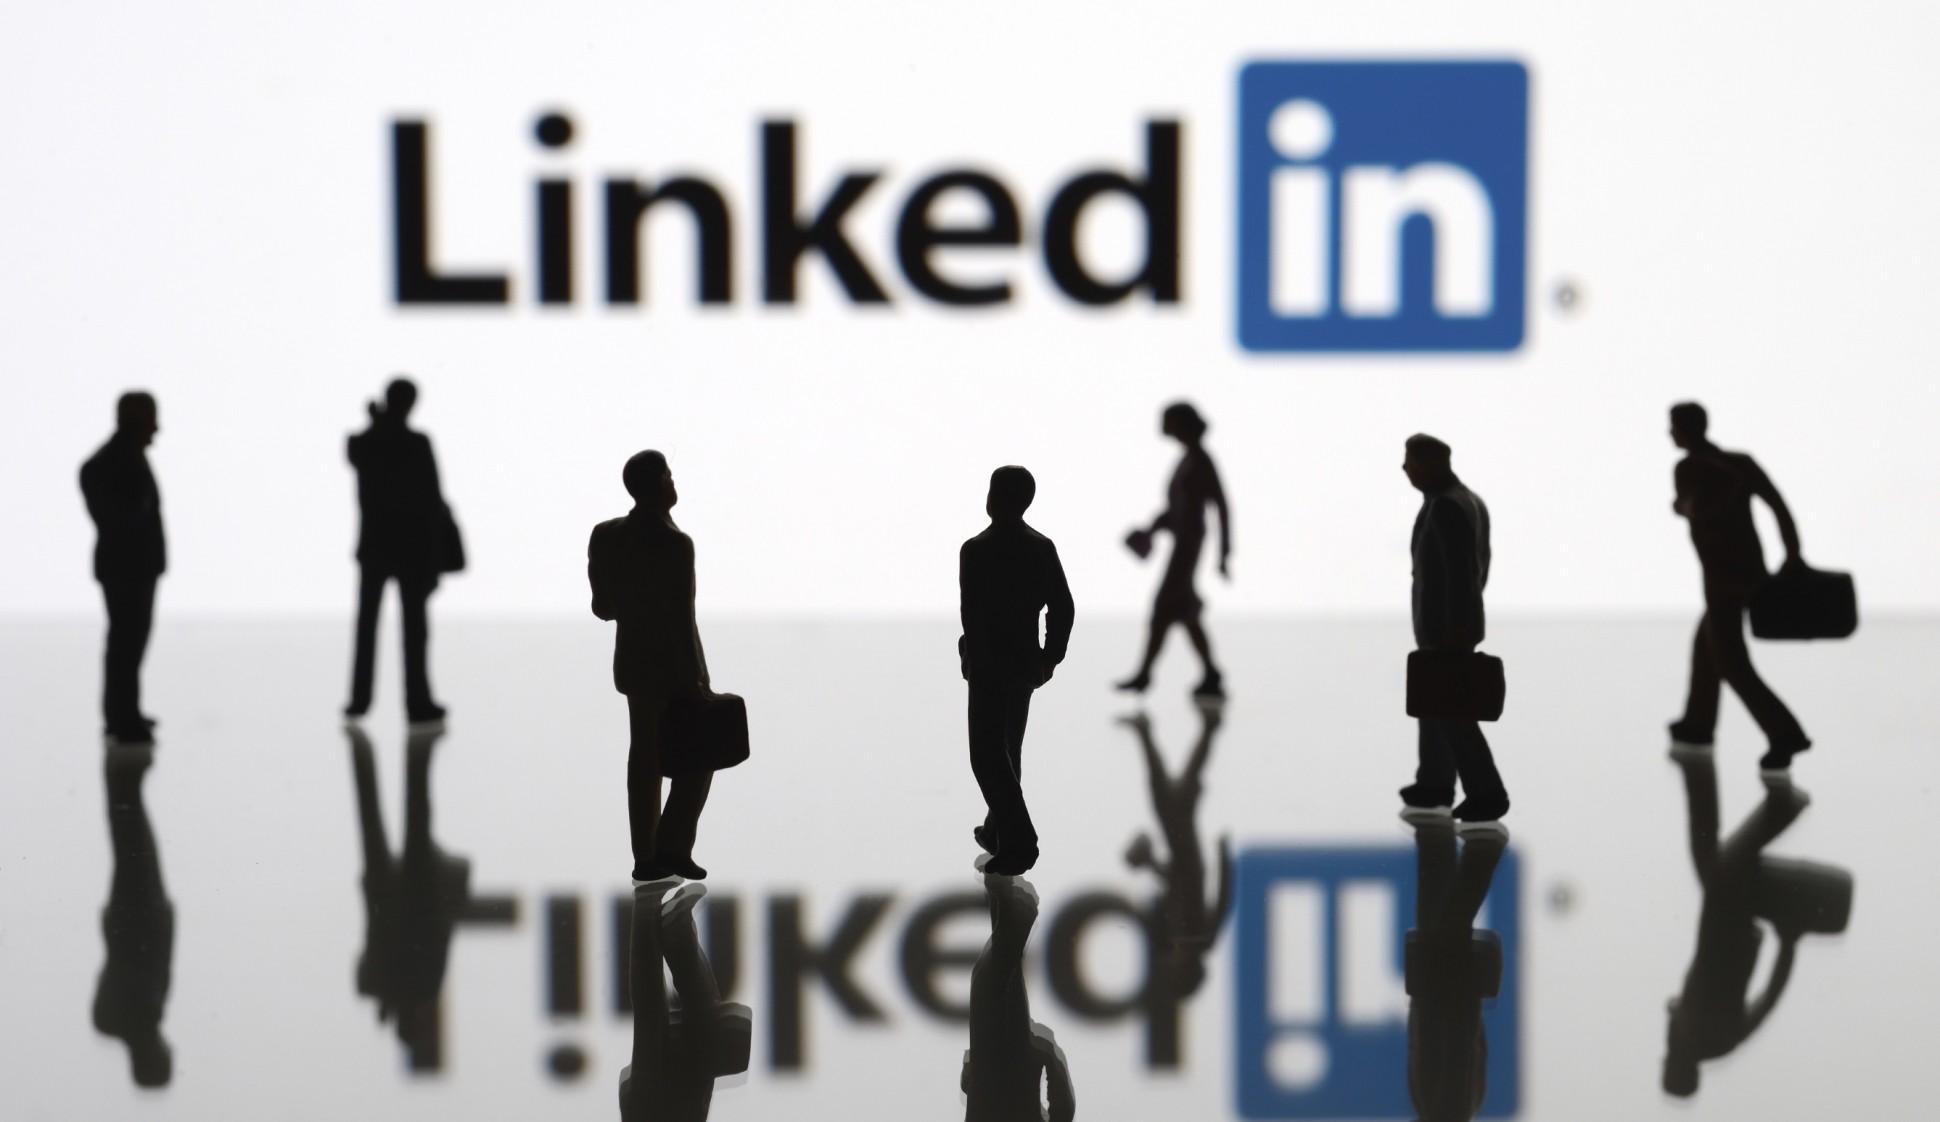 What’s new at LinkedIn?